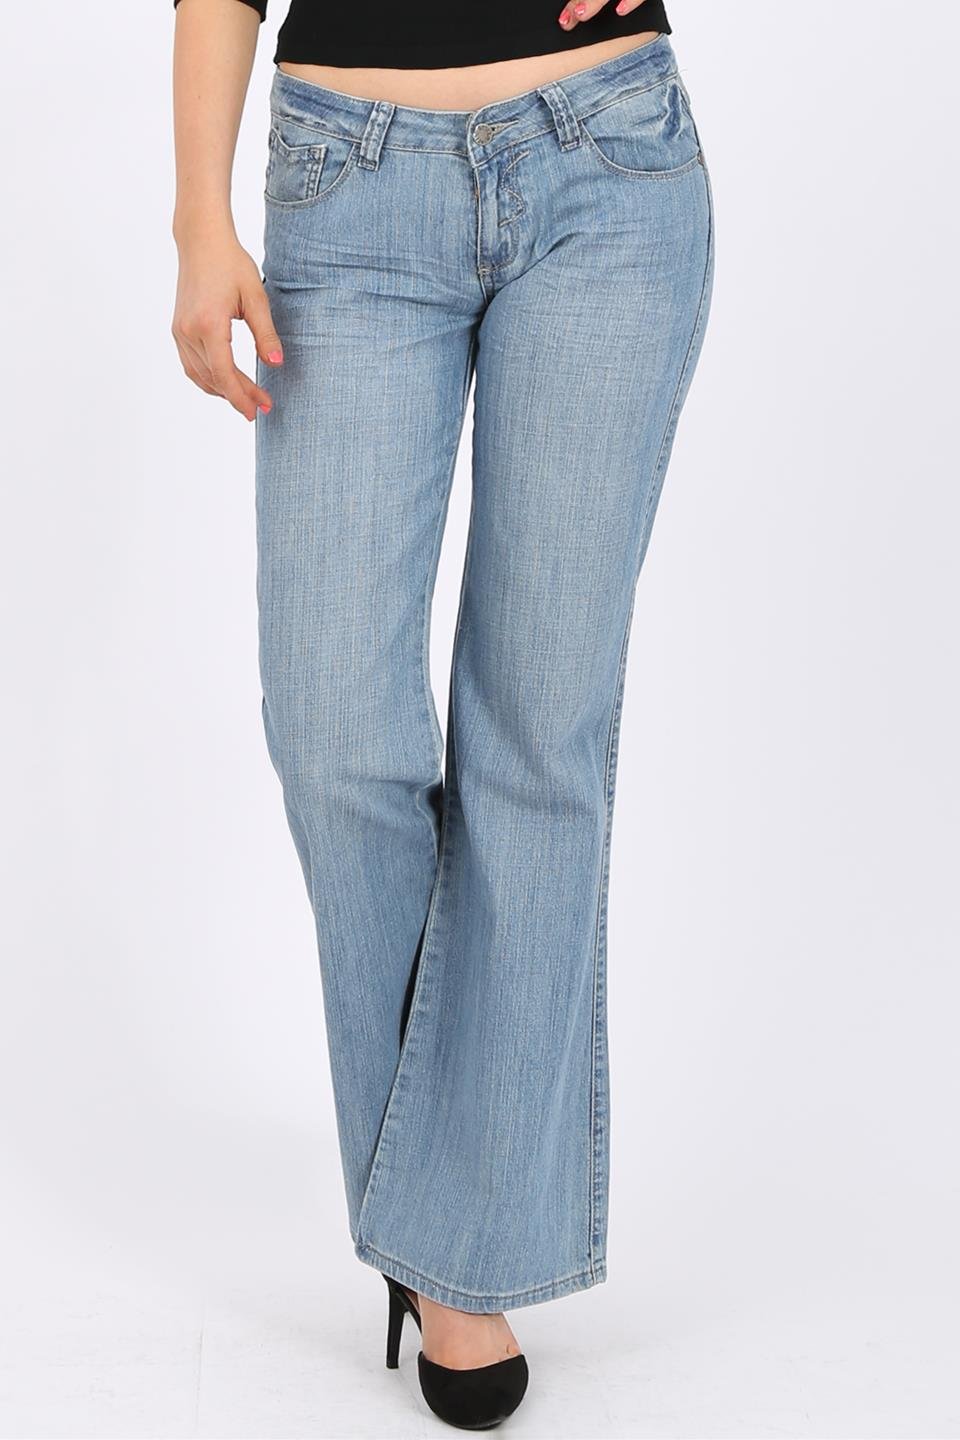 MISS PINKI Lily Wide leg jeans in light blue